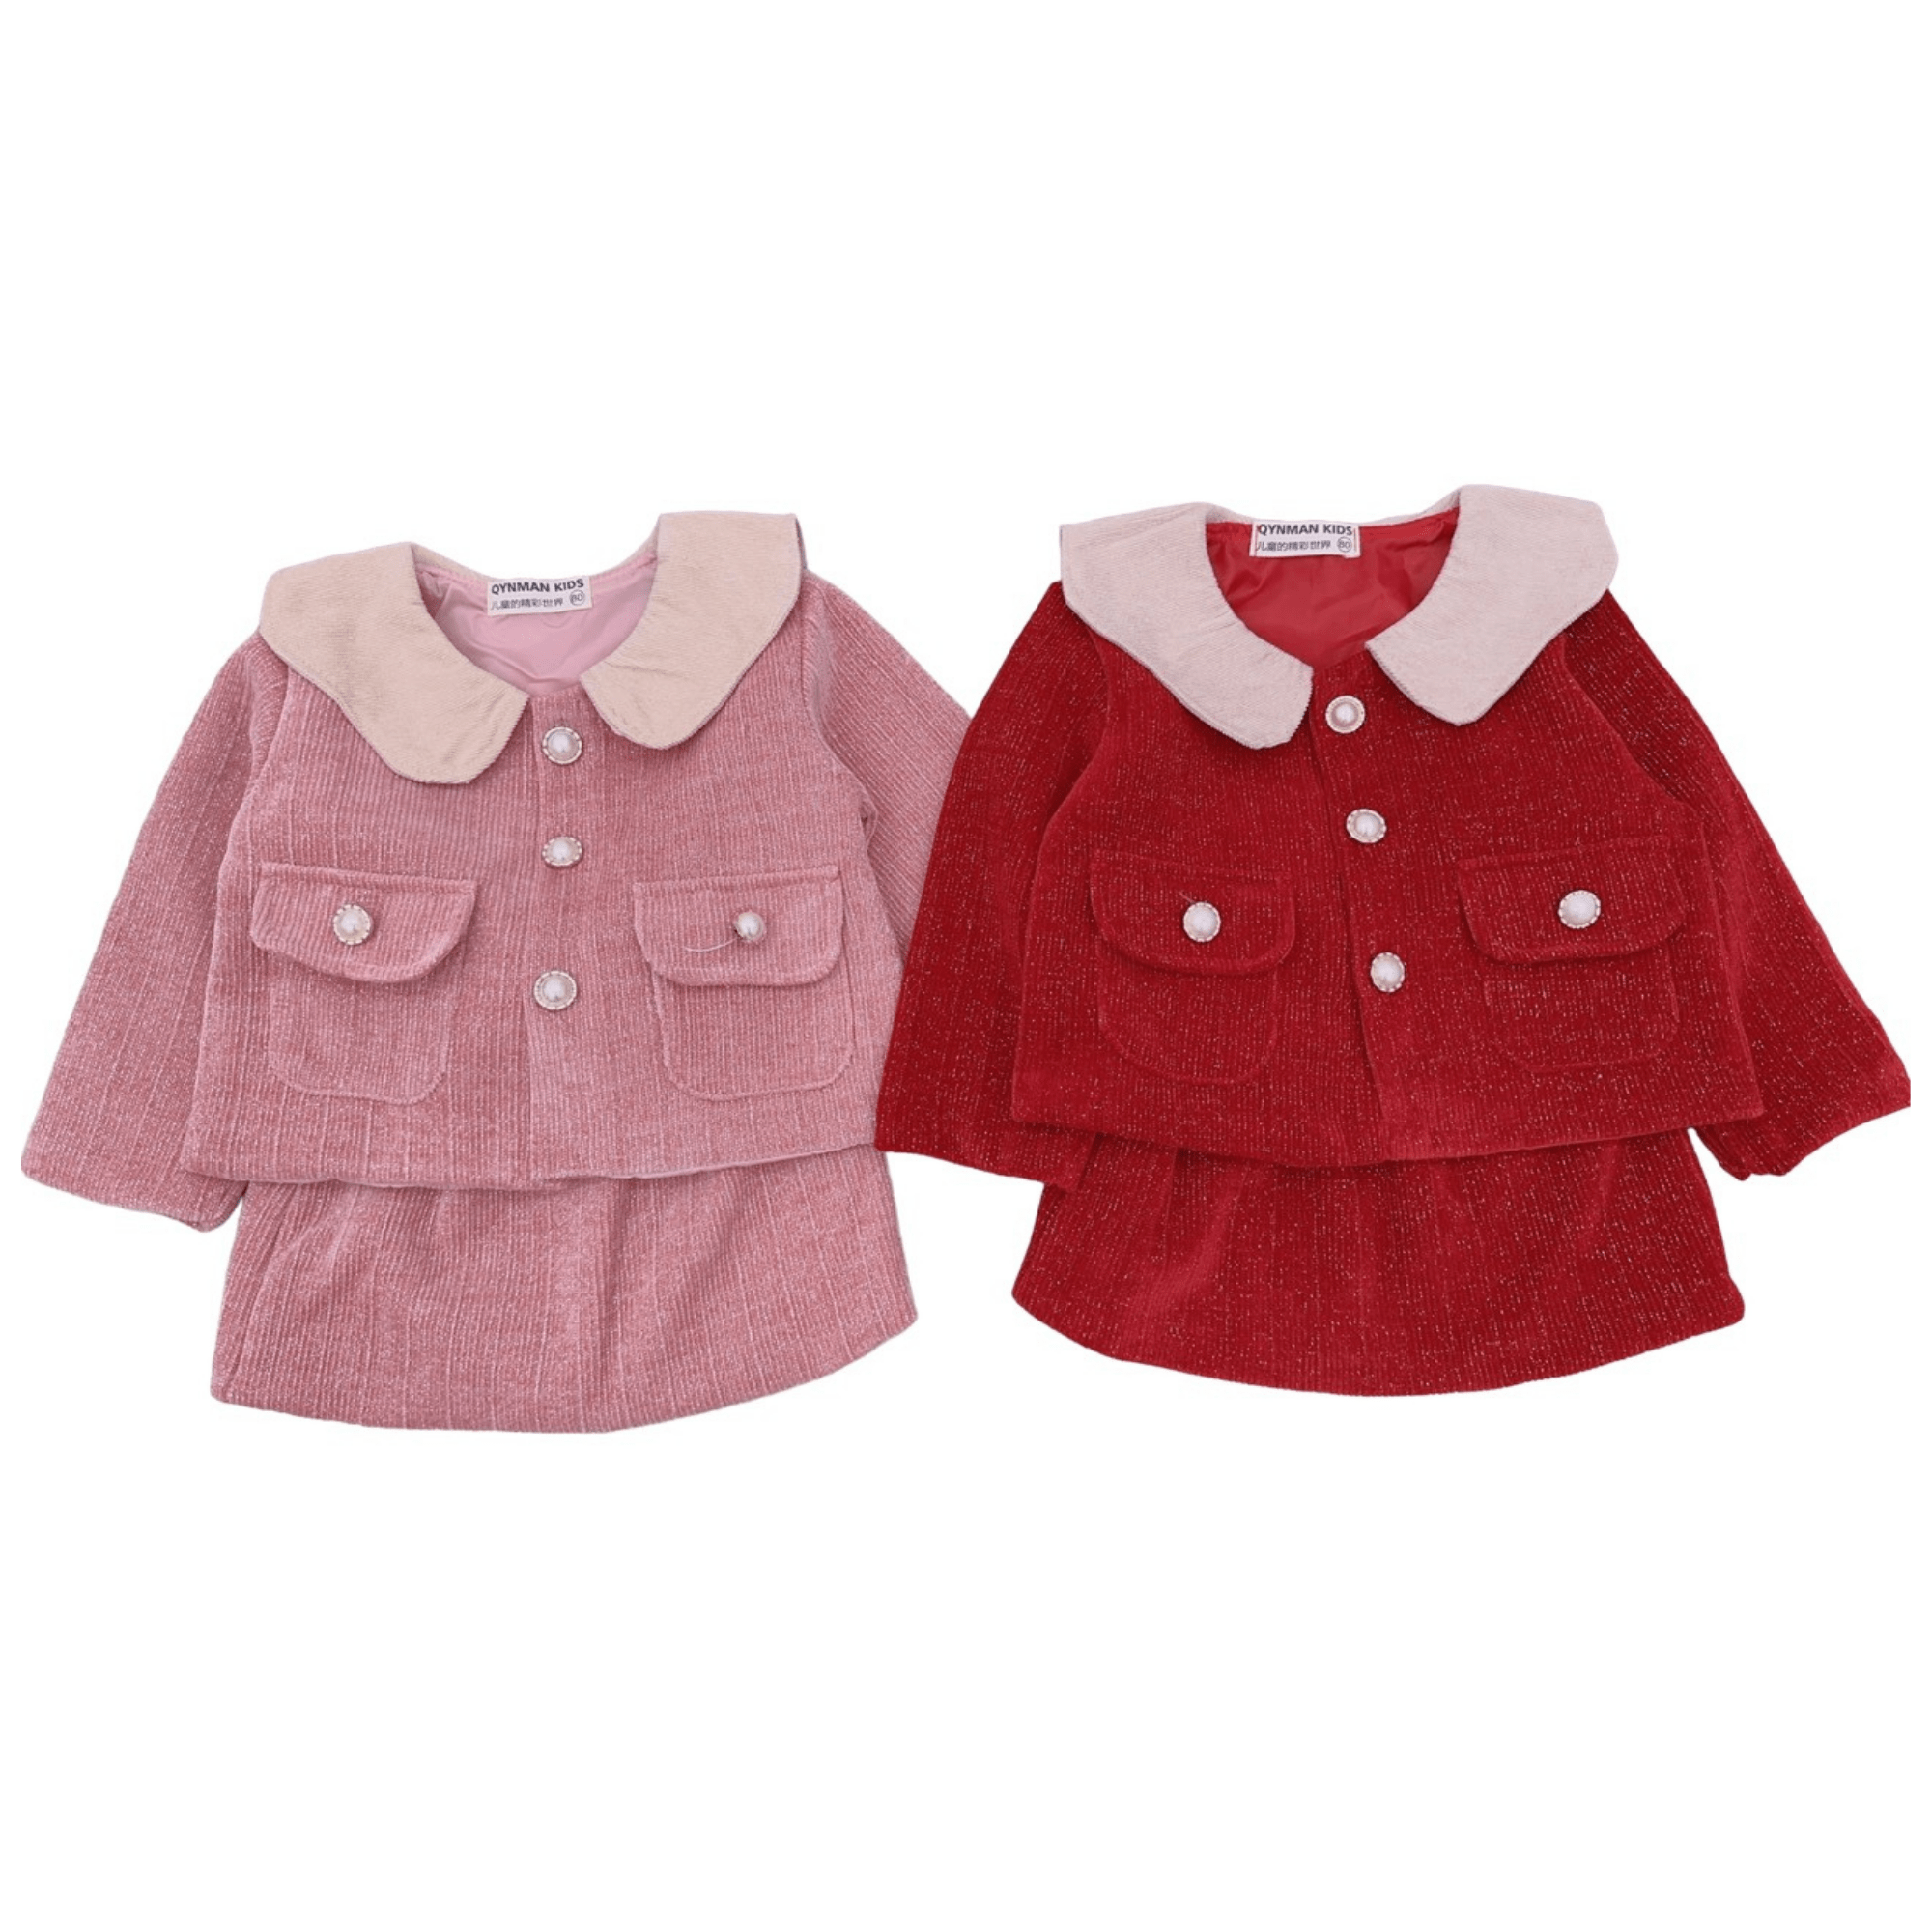 Winter Clothes For Kids High Quality 100% Wool Dresses New Fashion Each One In Opp Bag From Vietnam Manufacturer 6